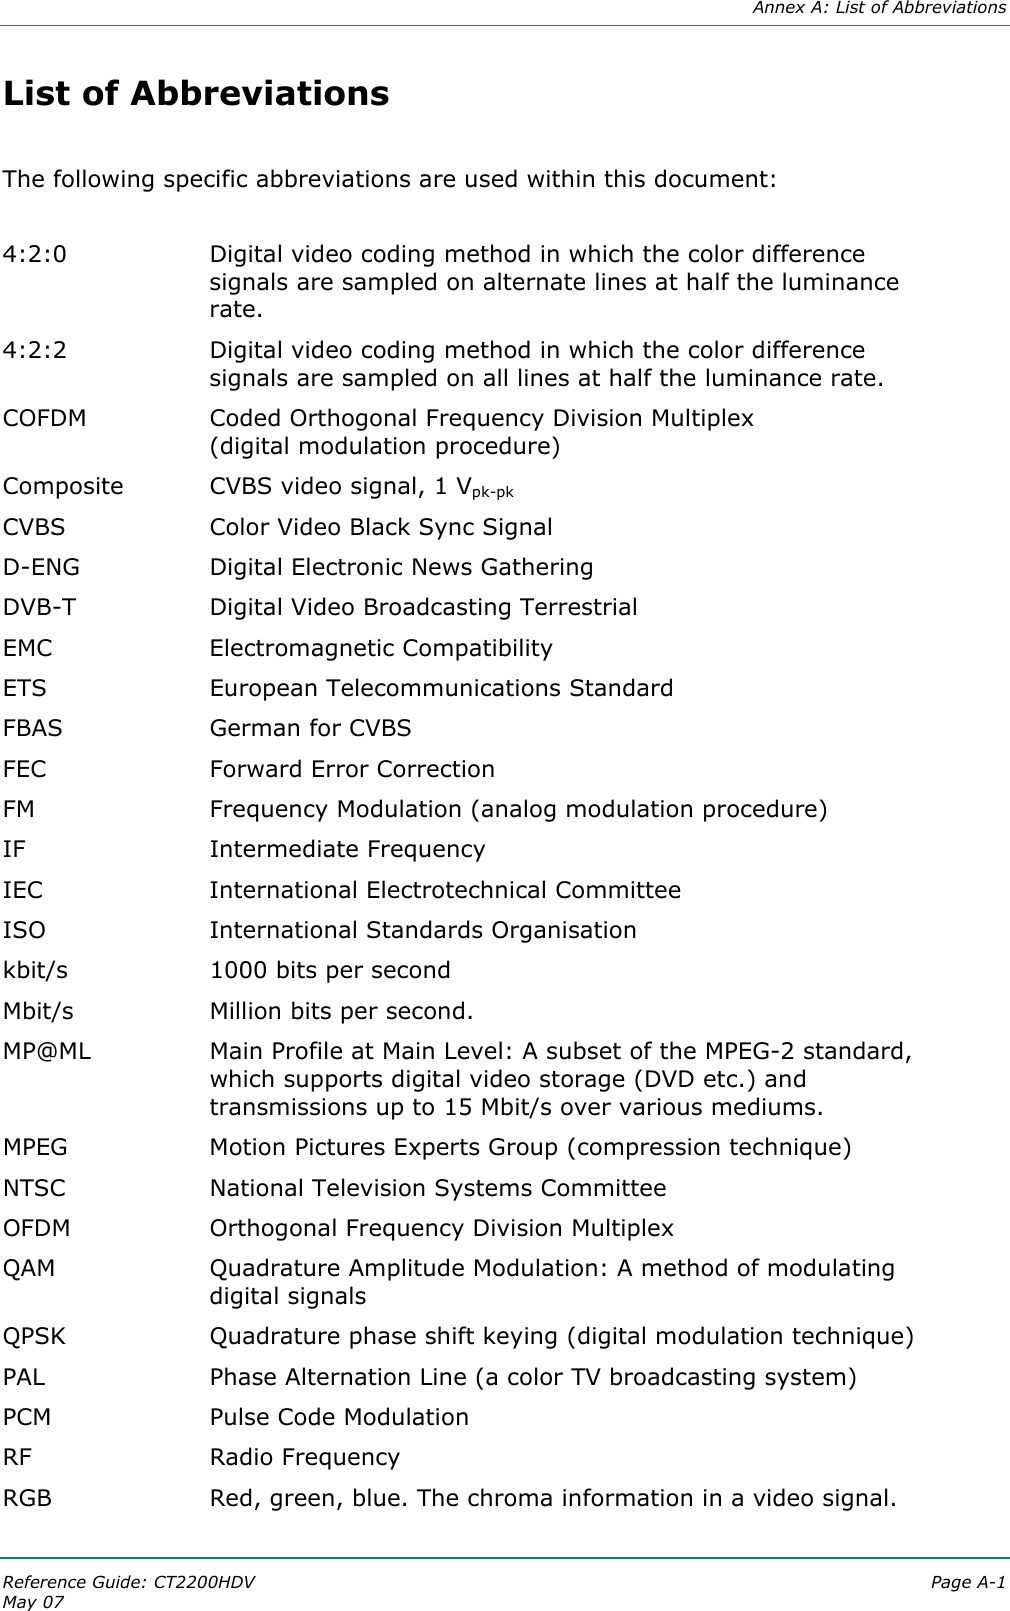  Annex A: List of Abbreviations Reference Guide: CT2200HDV  Page A-1 May 07   List of Abbreviations  The following specific abbreviations are used within this document:   4:2:0  Digital video coding method in which the color difference signals are sampled on alternate lines at half the luminance rate. 4:2:2  Digital video coding method in which the color difference signals are sampled on all lines at half the luminance rate. COFDM  Coded Orthogonal Frequency Division Multiplex  (digital modulation procedure) Composite  CVBS video signal, 1 Vpk-pk CVBS  Color Video Black Sync Signal D-ENG  Digital Electronic News Gathering DVB-T  Digital Video Broadcasting Terrestrial EMC   Electromagnetic Compatibility ETS  European Telecommunications Standard FBAS  German for CVBS FEC  Forward Error Correction FM  Frequency Modulation (analog modulation procedure) IF  Intermediate Frequency IEC  International Electrotechnical Committee ISO  International Standards Organisation kbit/s   1000 bits per second Mbit/s  Million bits per second. MP@ML  Main Profile at Main Level: A subset of the MPEG-2 standard, which supports digital video storage (DVD etc.) and transmissions up to 15 Mbit/s over various mediums. MPEG  Motion Pictures Experts Group (compression technique)  NTSC  National Television Systems Committee OFDM   Orthogonal Frequency Division Multiplex QAM  Quadrature Amplitude Modulation: A method of modulating digital signals QPSK  Quadrature phase shift keying (digital modulation technique) PAL  Phase Alternation Line (a color TV broadcasting system) PCM  Pulse Code Modulation RF  Radio Frequency RGB  Red, green, blue. The chroma information in a video signal. 